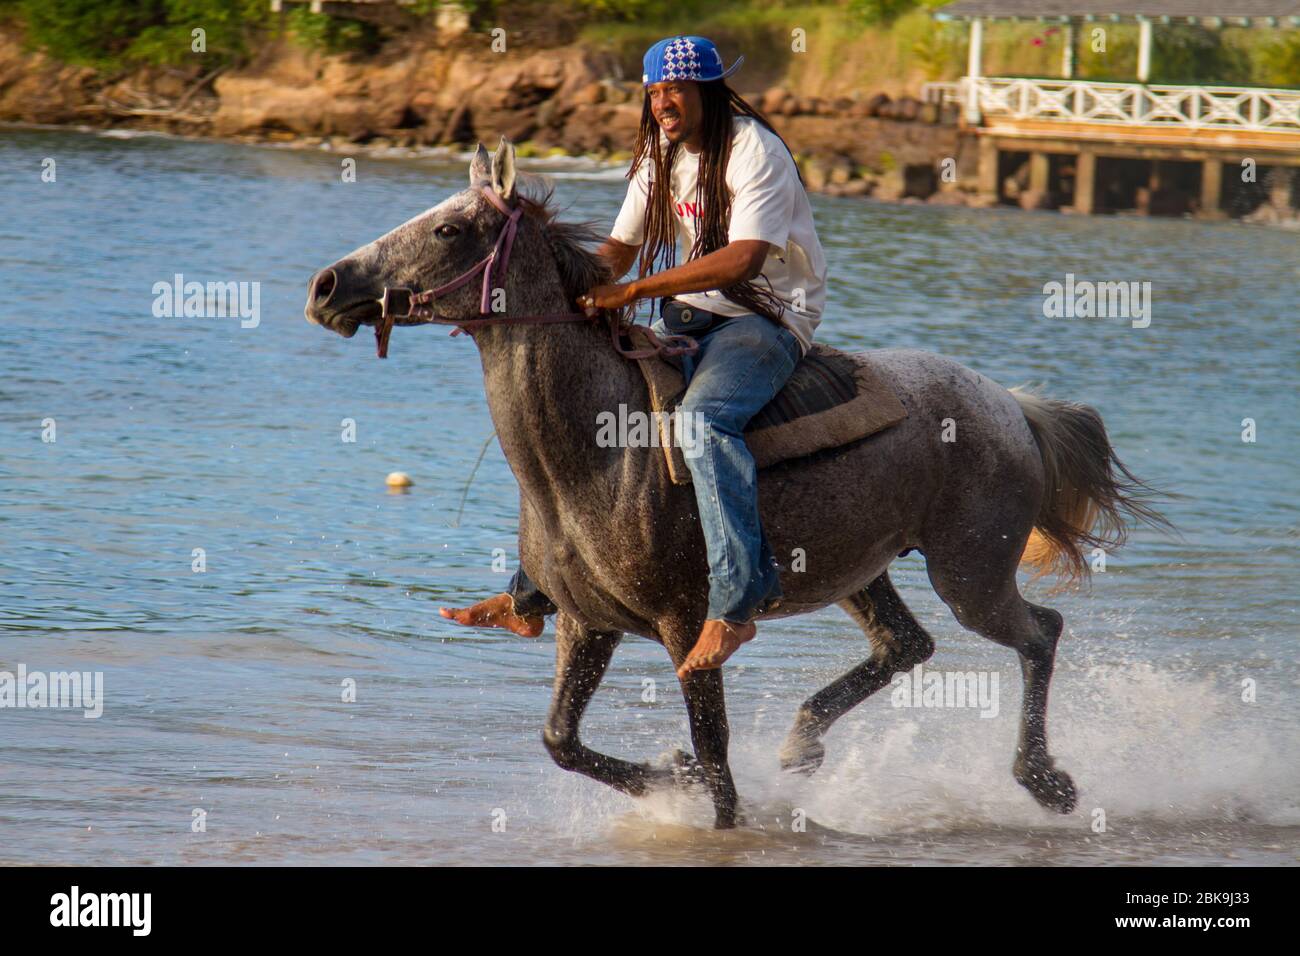 Smugglers Cove, St Lucia-December 11th 2010: Almond Resort, Smugglers Cove, St Lucia-December 11th 2010: Local St Lucian enjoys a Gallop on the Beach Stock Photo